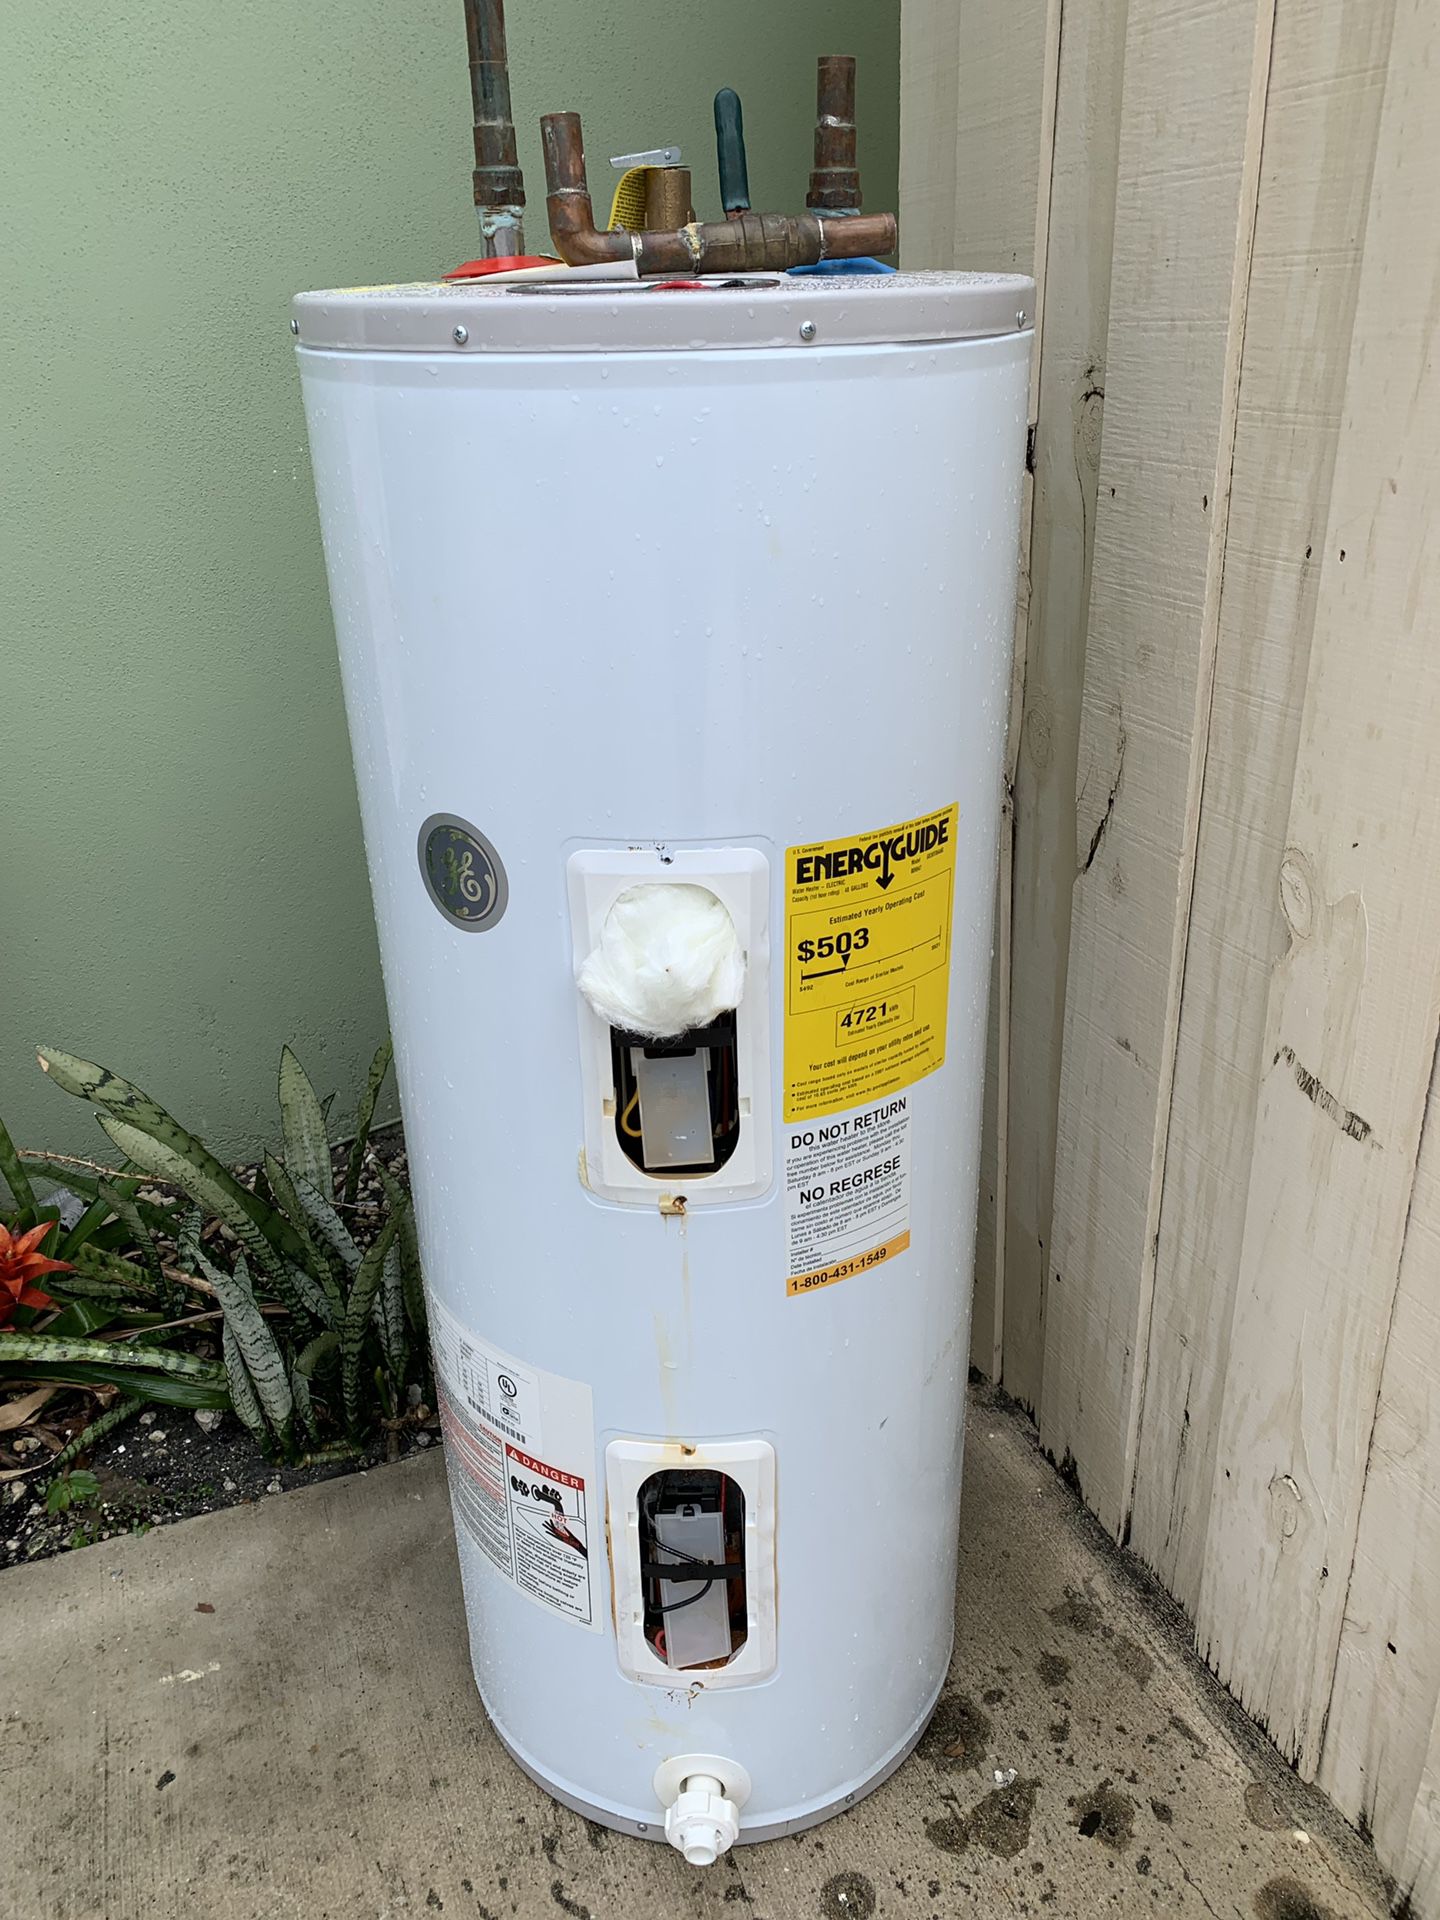 Free 30 gallon water heater for recycle and some copper. I still have it. 4th ave N & i95. Lake worth